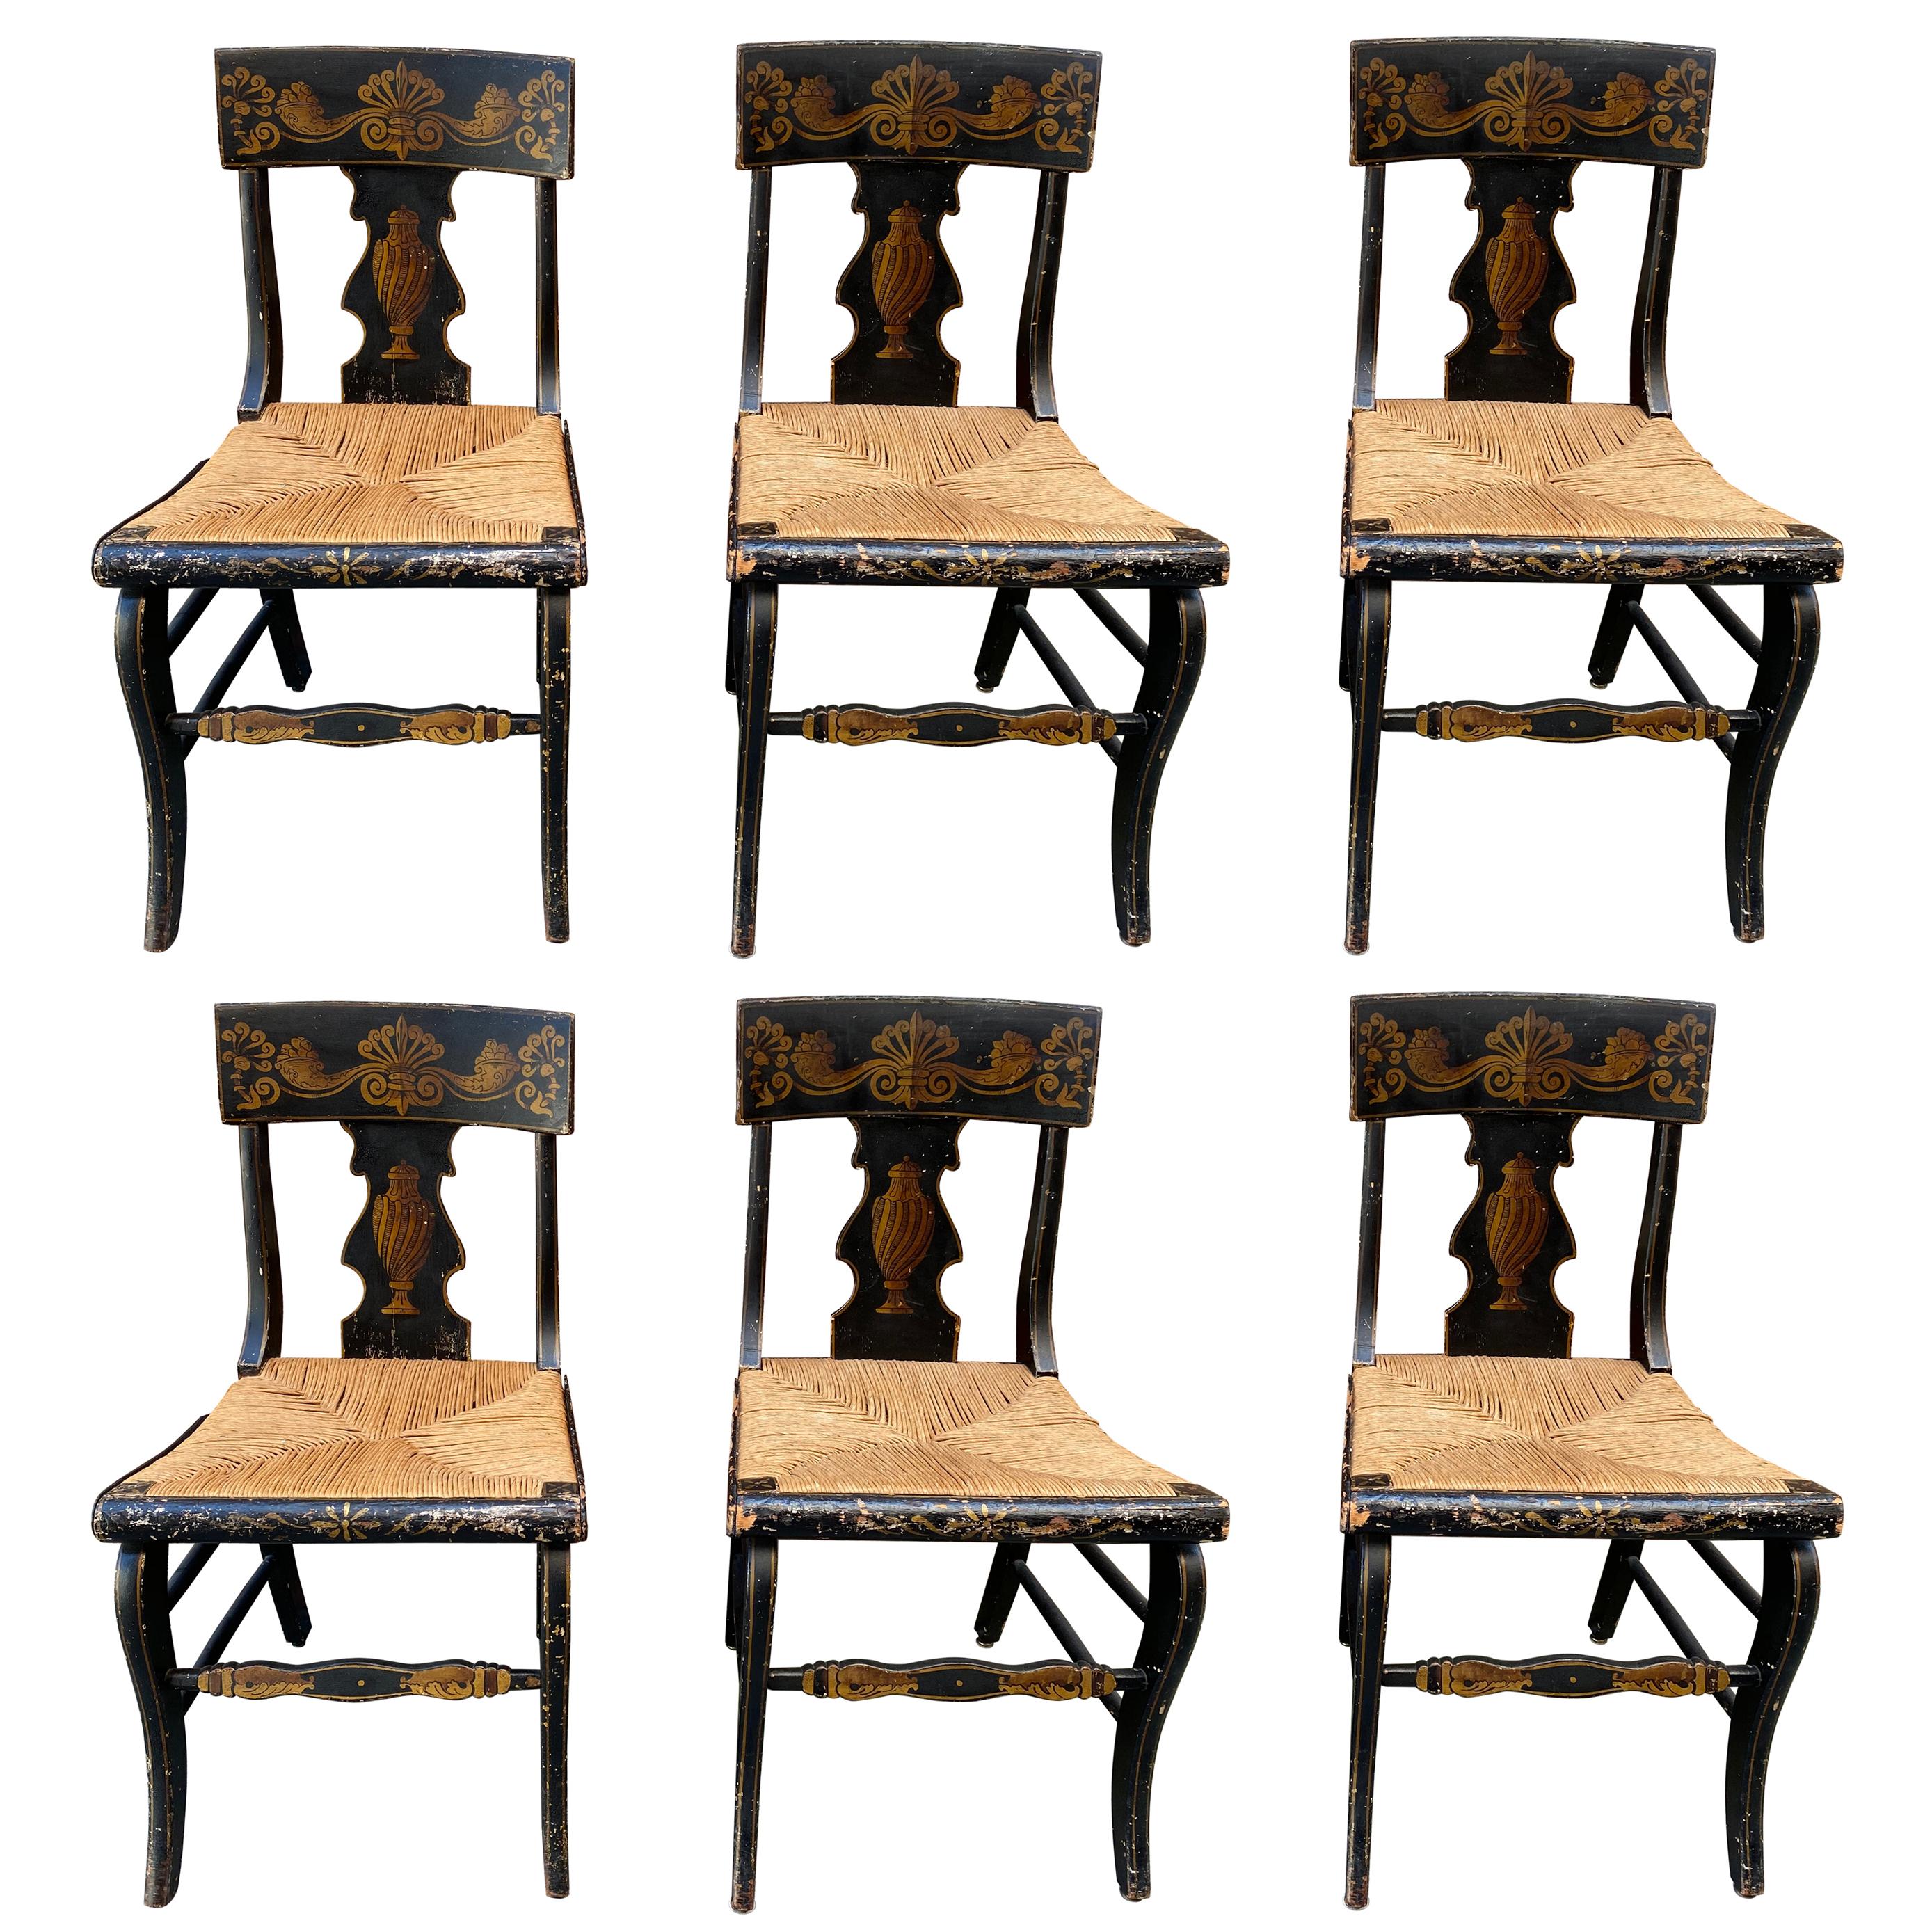 Set of Six 19th Century Side Chairs in Black Paint with Gold Painted Detailing